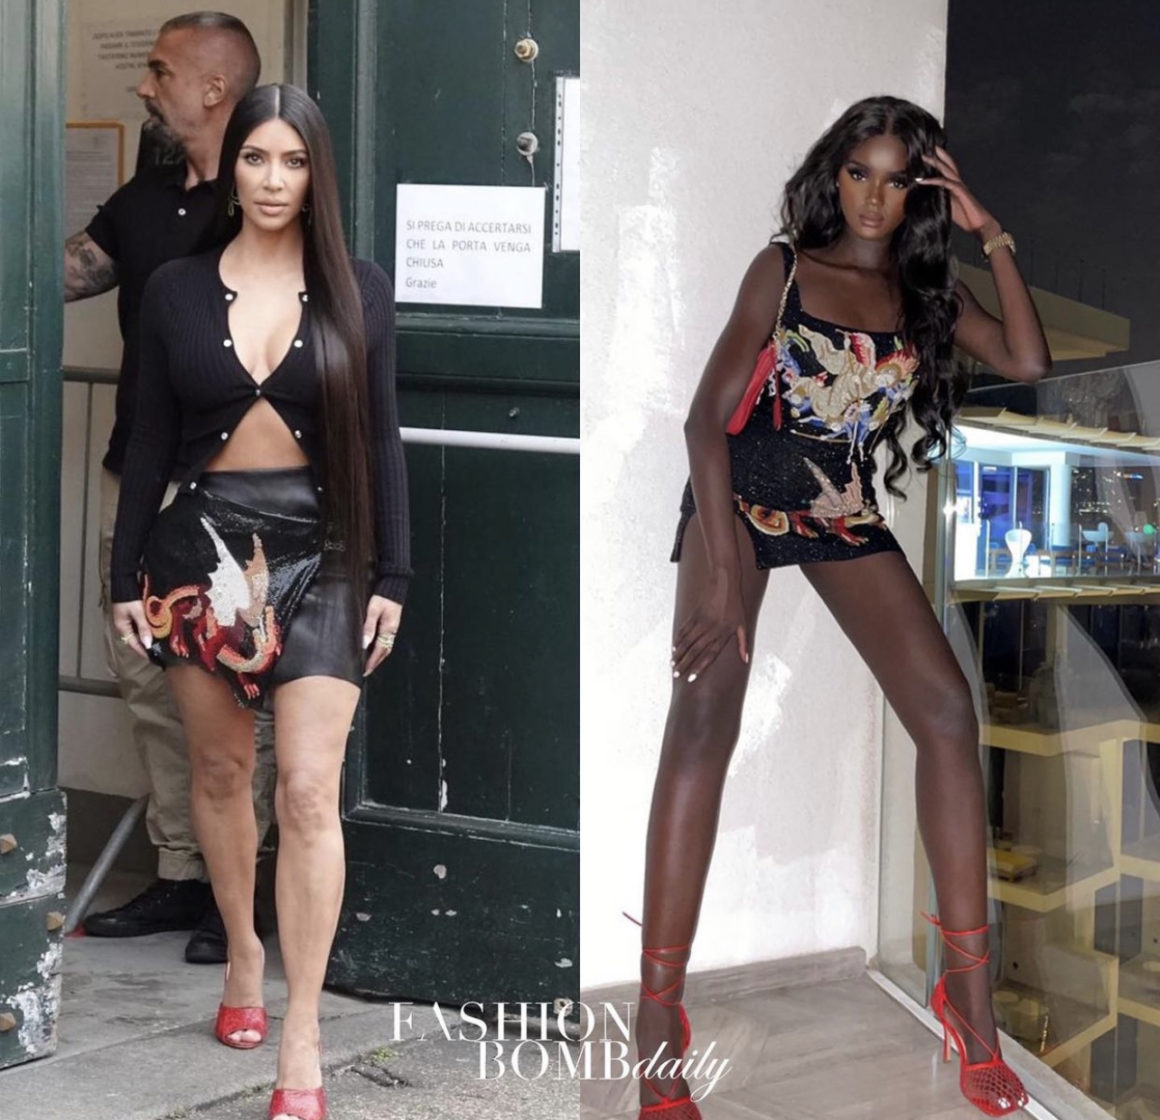 On the Scene at Saweetie's Freaknik Birthday Party: Saweetie in Louis  Vuitton-Inspired Look by Mario De La Torre, Chloe Bailey in Bryan Hearns  Orange Outfit, JT in L.O.C.A. Yellow Set, Yung Miami